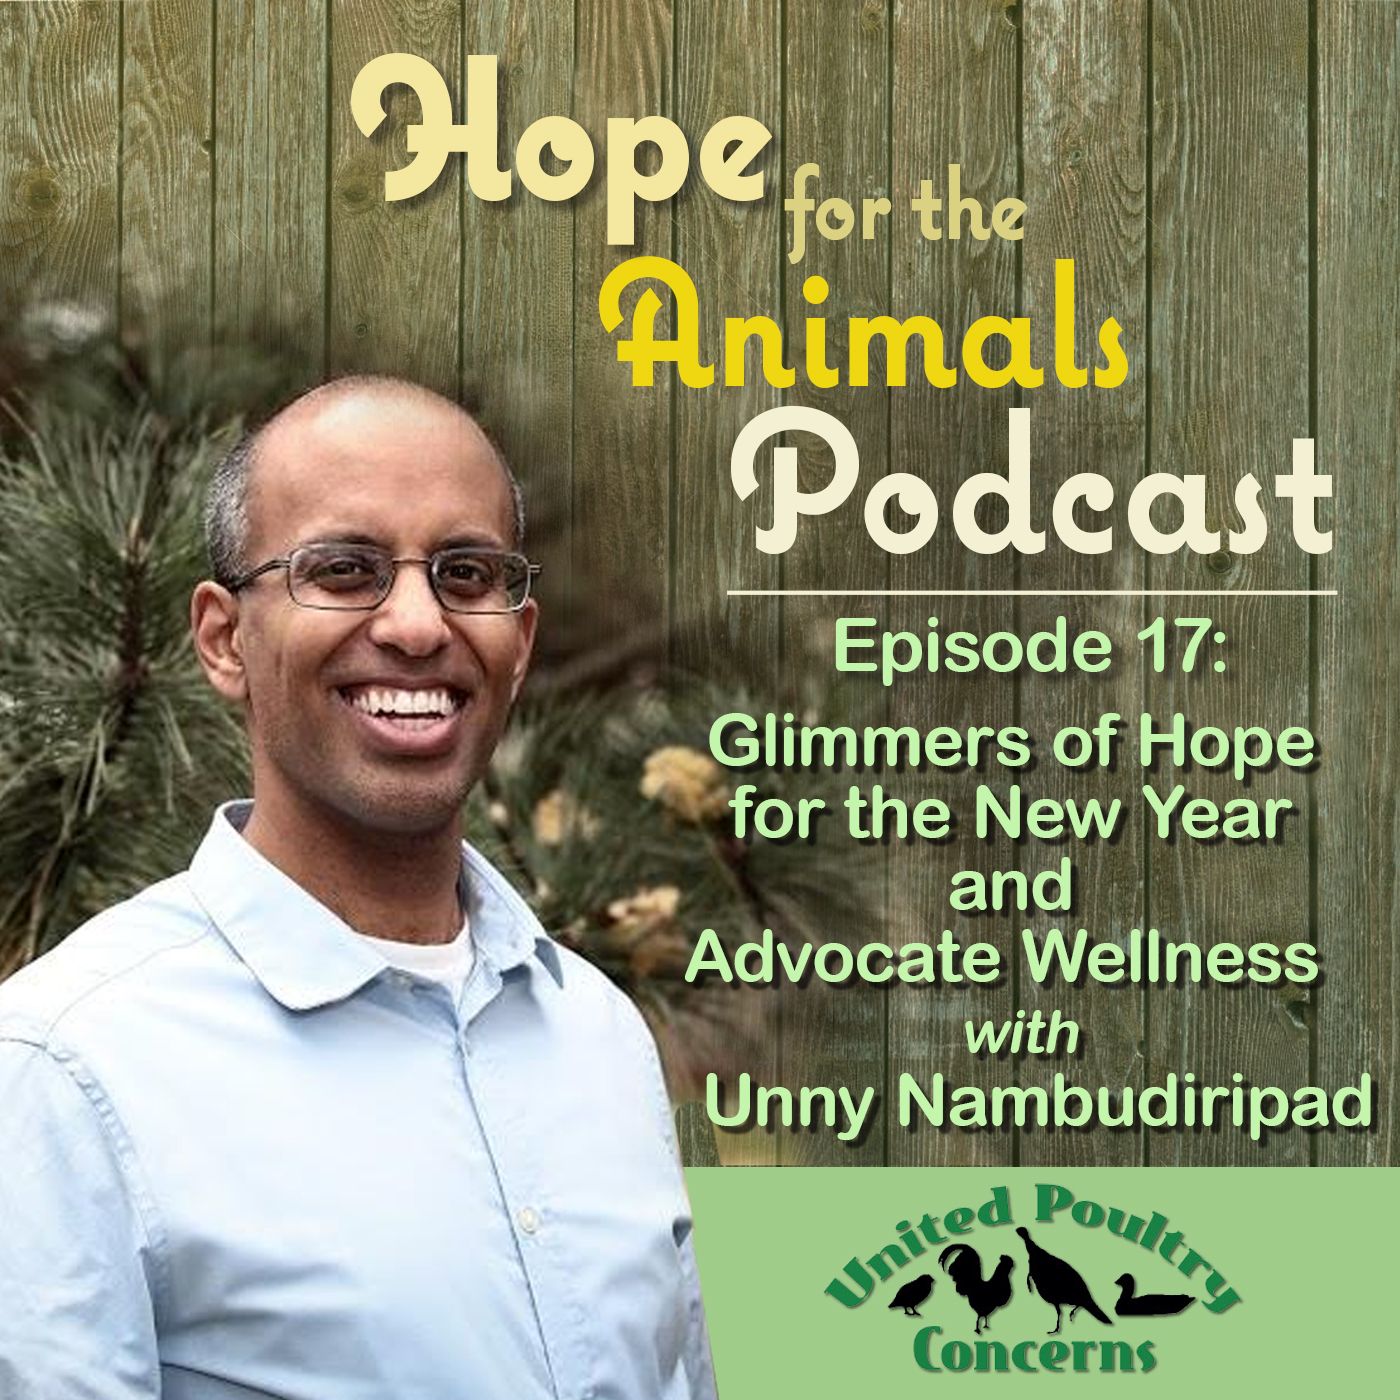 Episode 17: Glimmers of Hope for the New Year and Advocate Wellness with Unny Nambudiripad